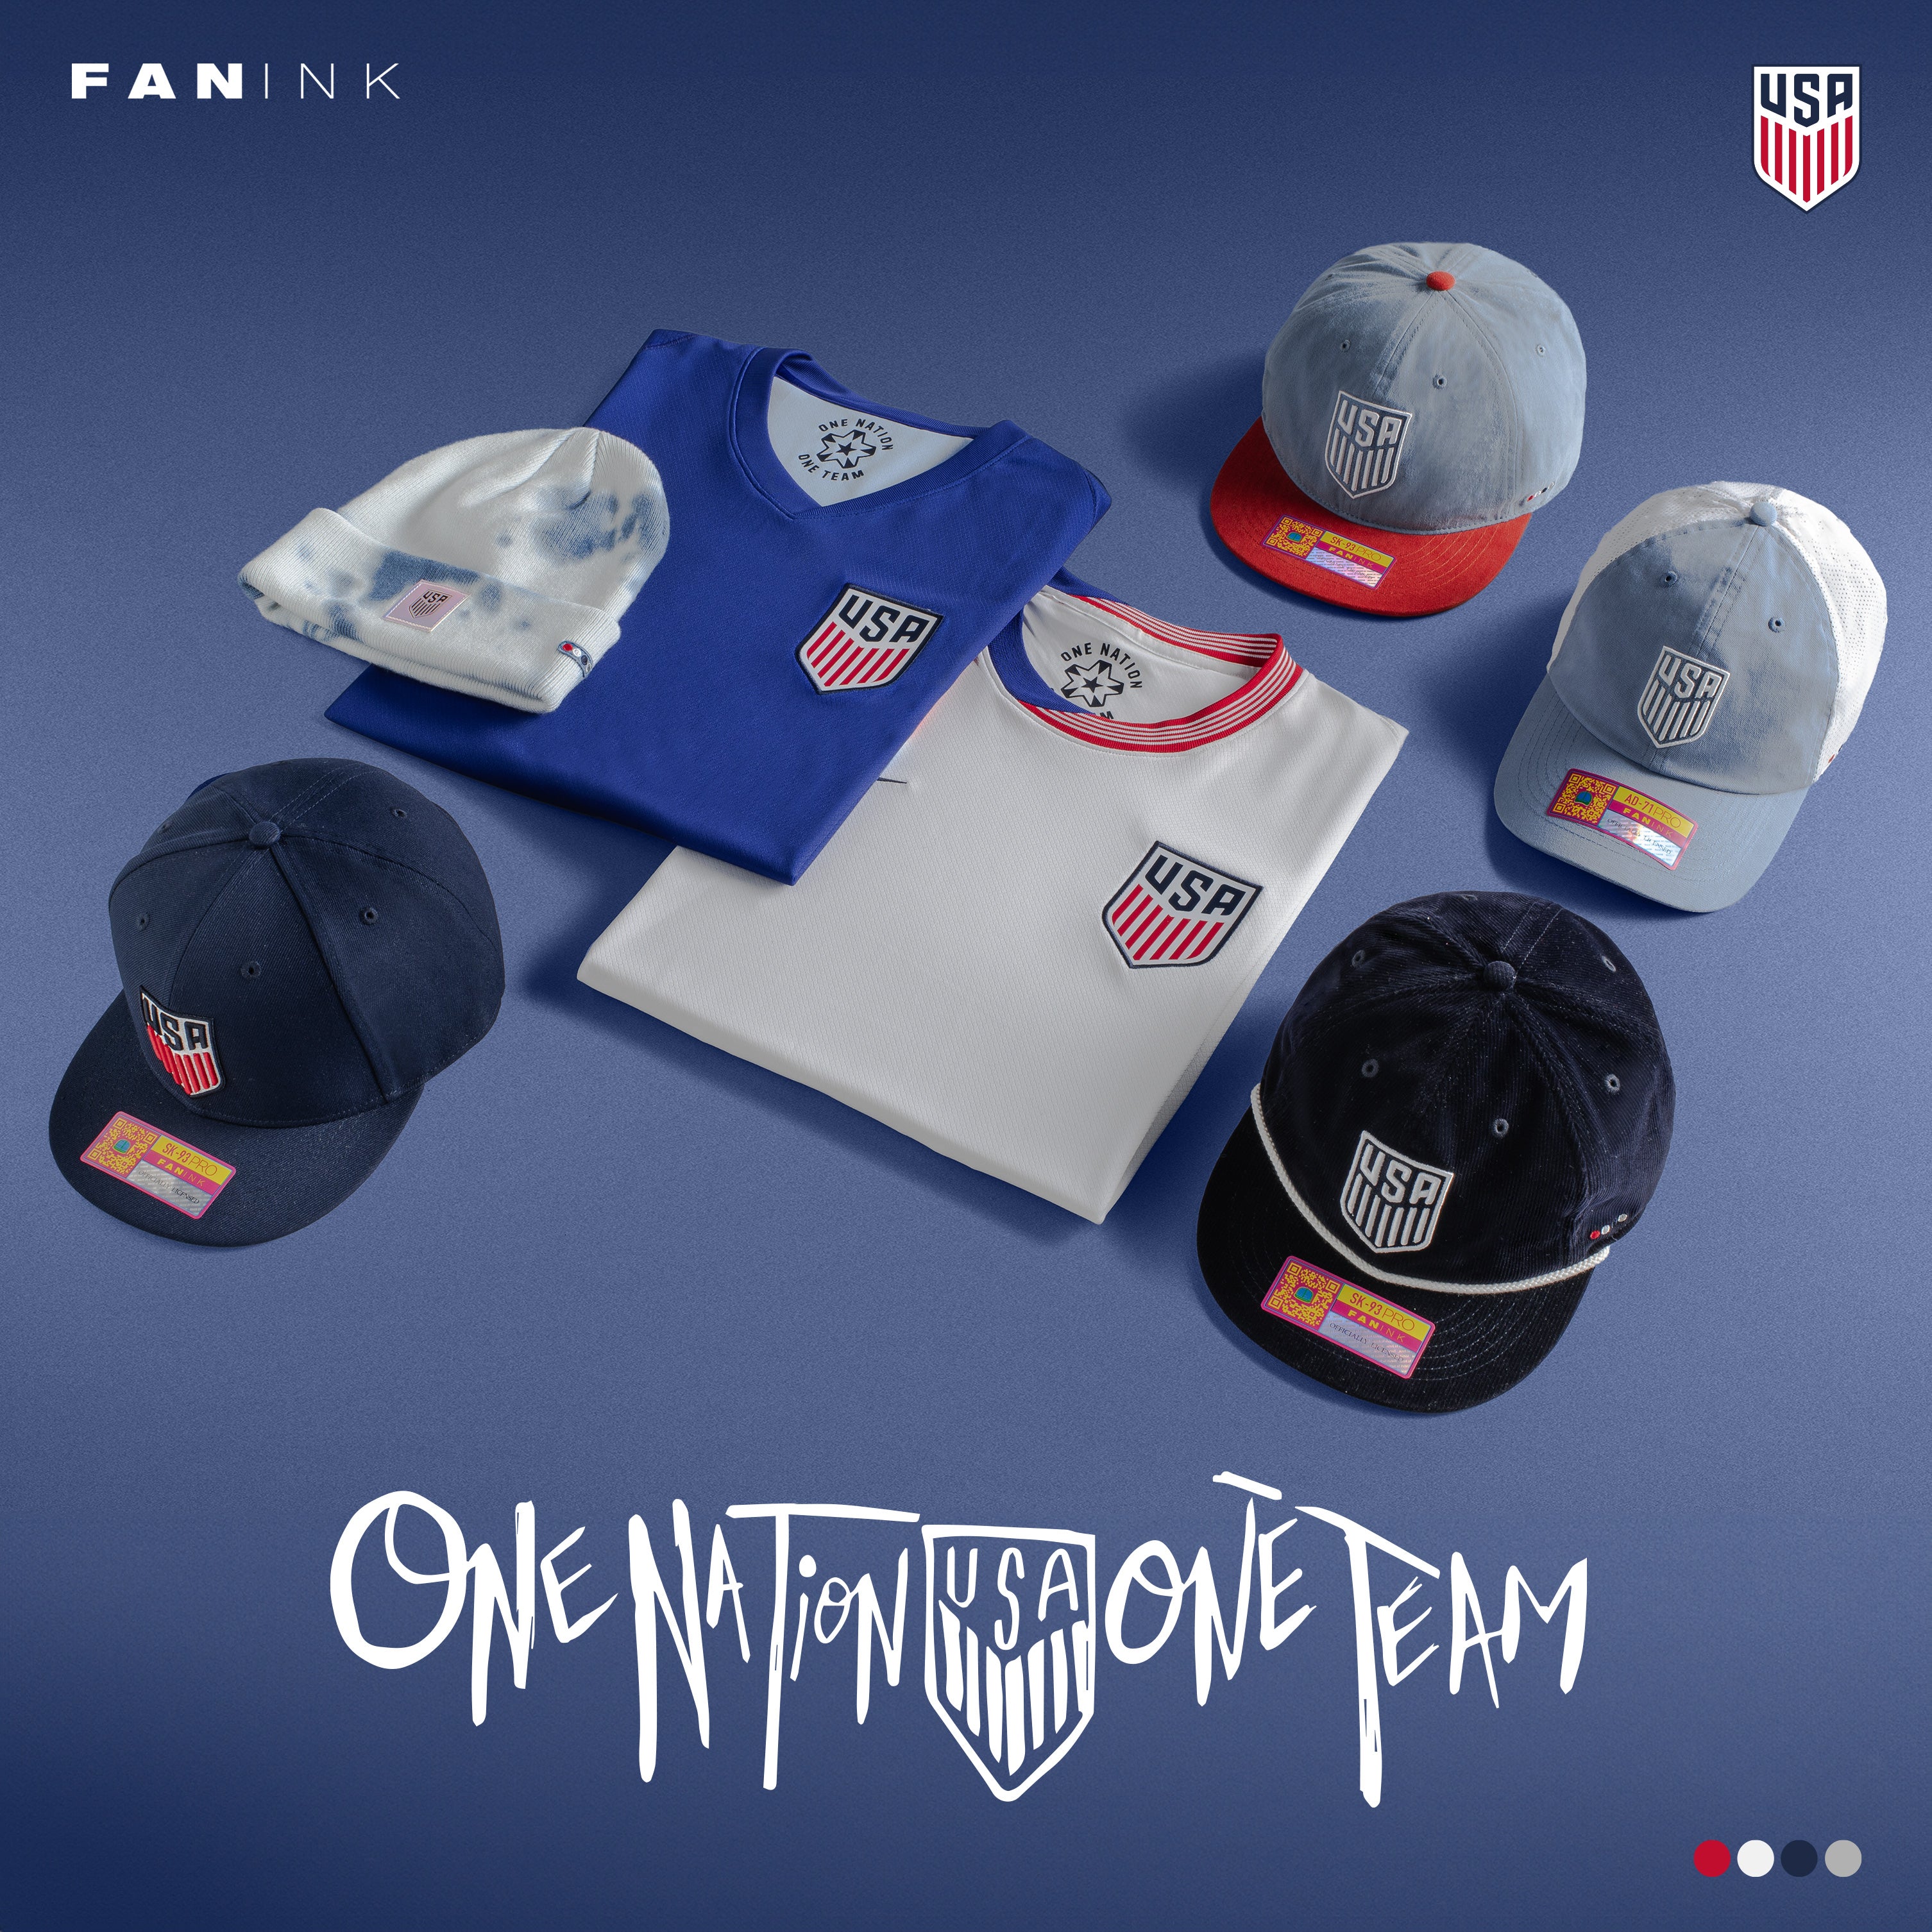 A Collection of hats and USA Jerseys and the tagline One Nation USA One Team written at the bottom